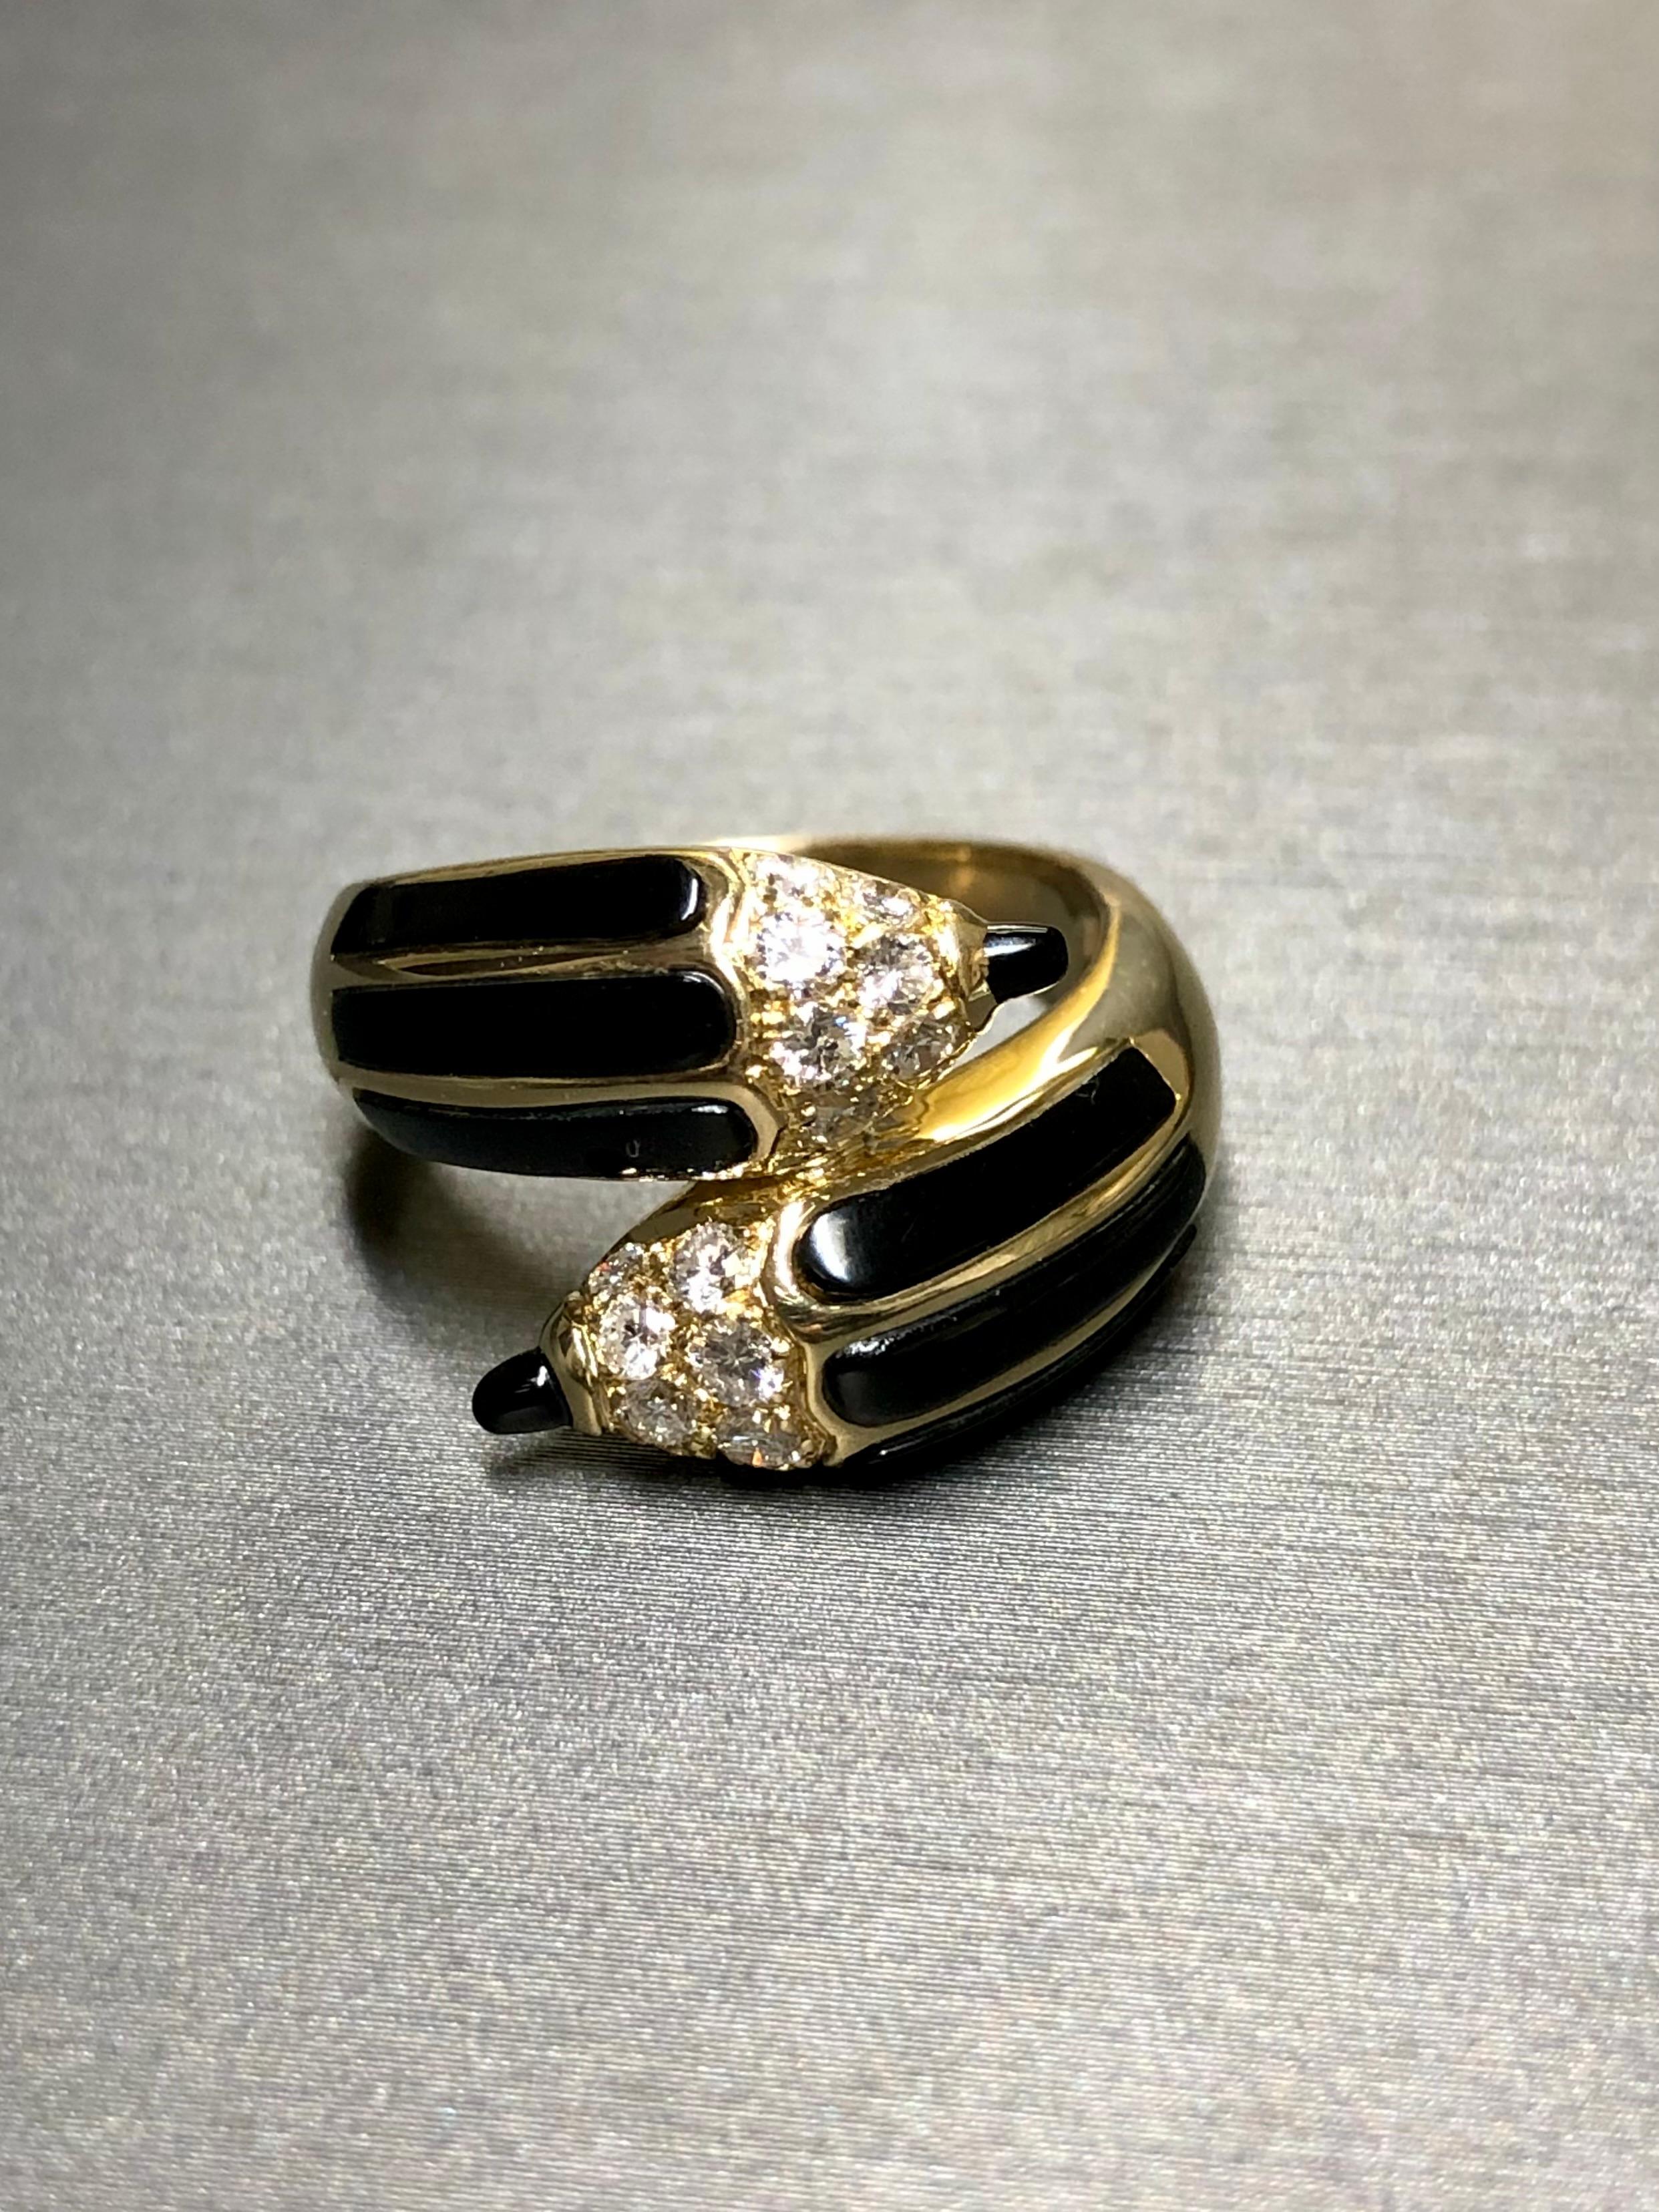 A whimsical estate ring done in 18K yellow gold and flawless black enamel. The tips of each pencil are prong set with perfectly matched G color VS clarity round diamonds. The design and execution are just gorgeous. This is quite the original piece